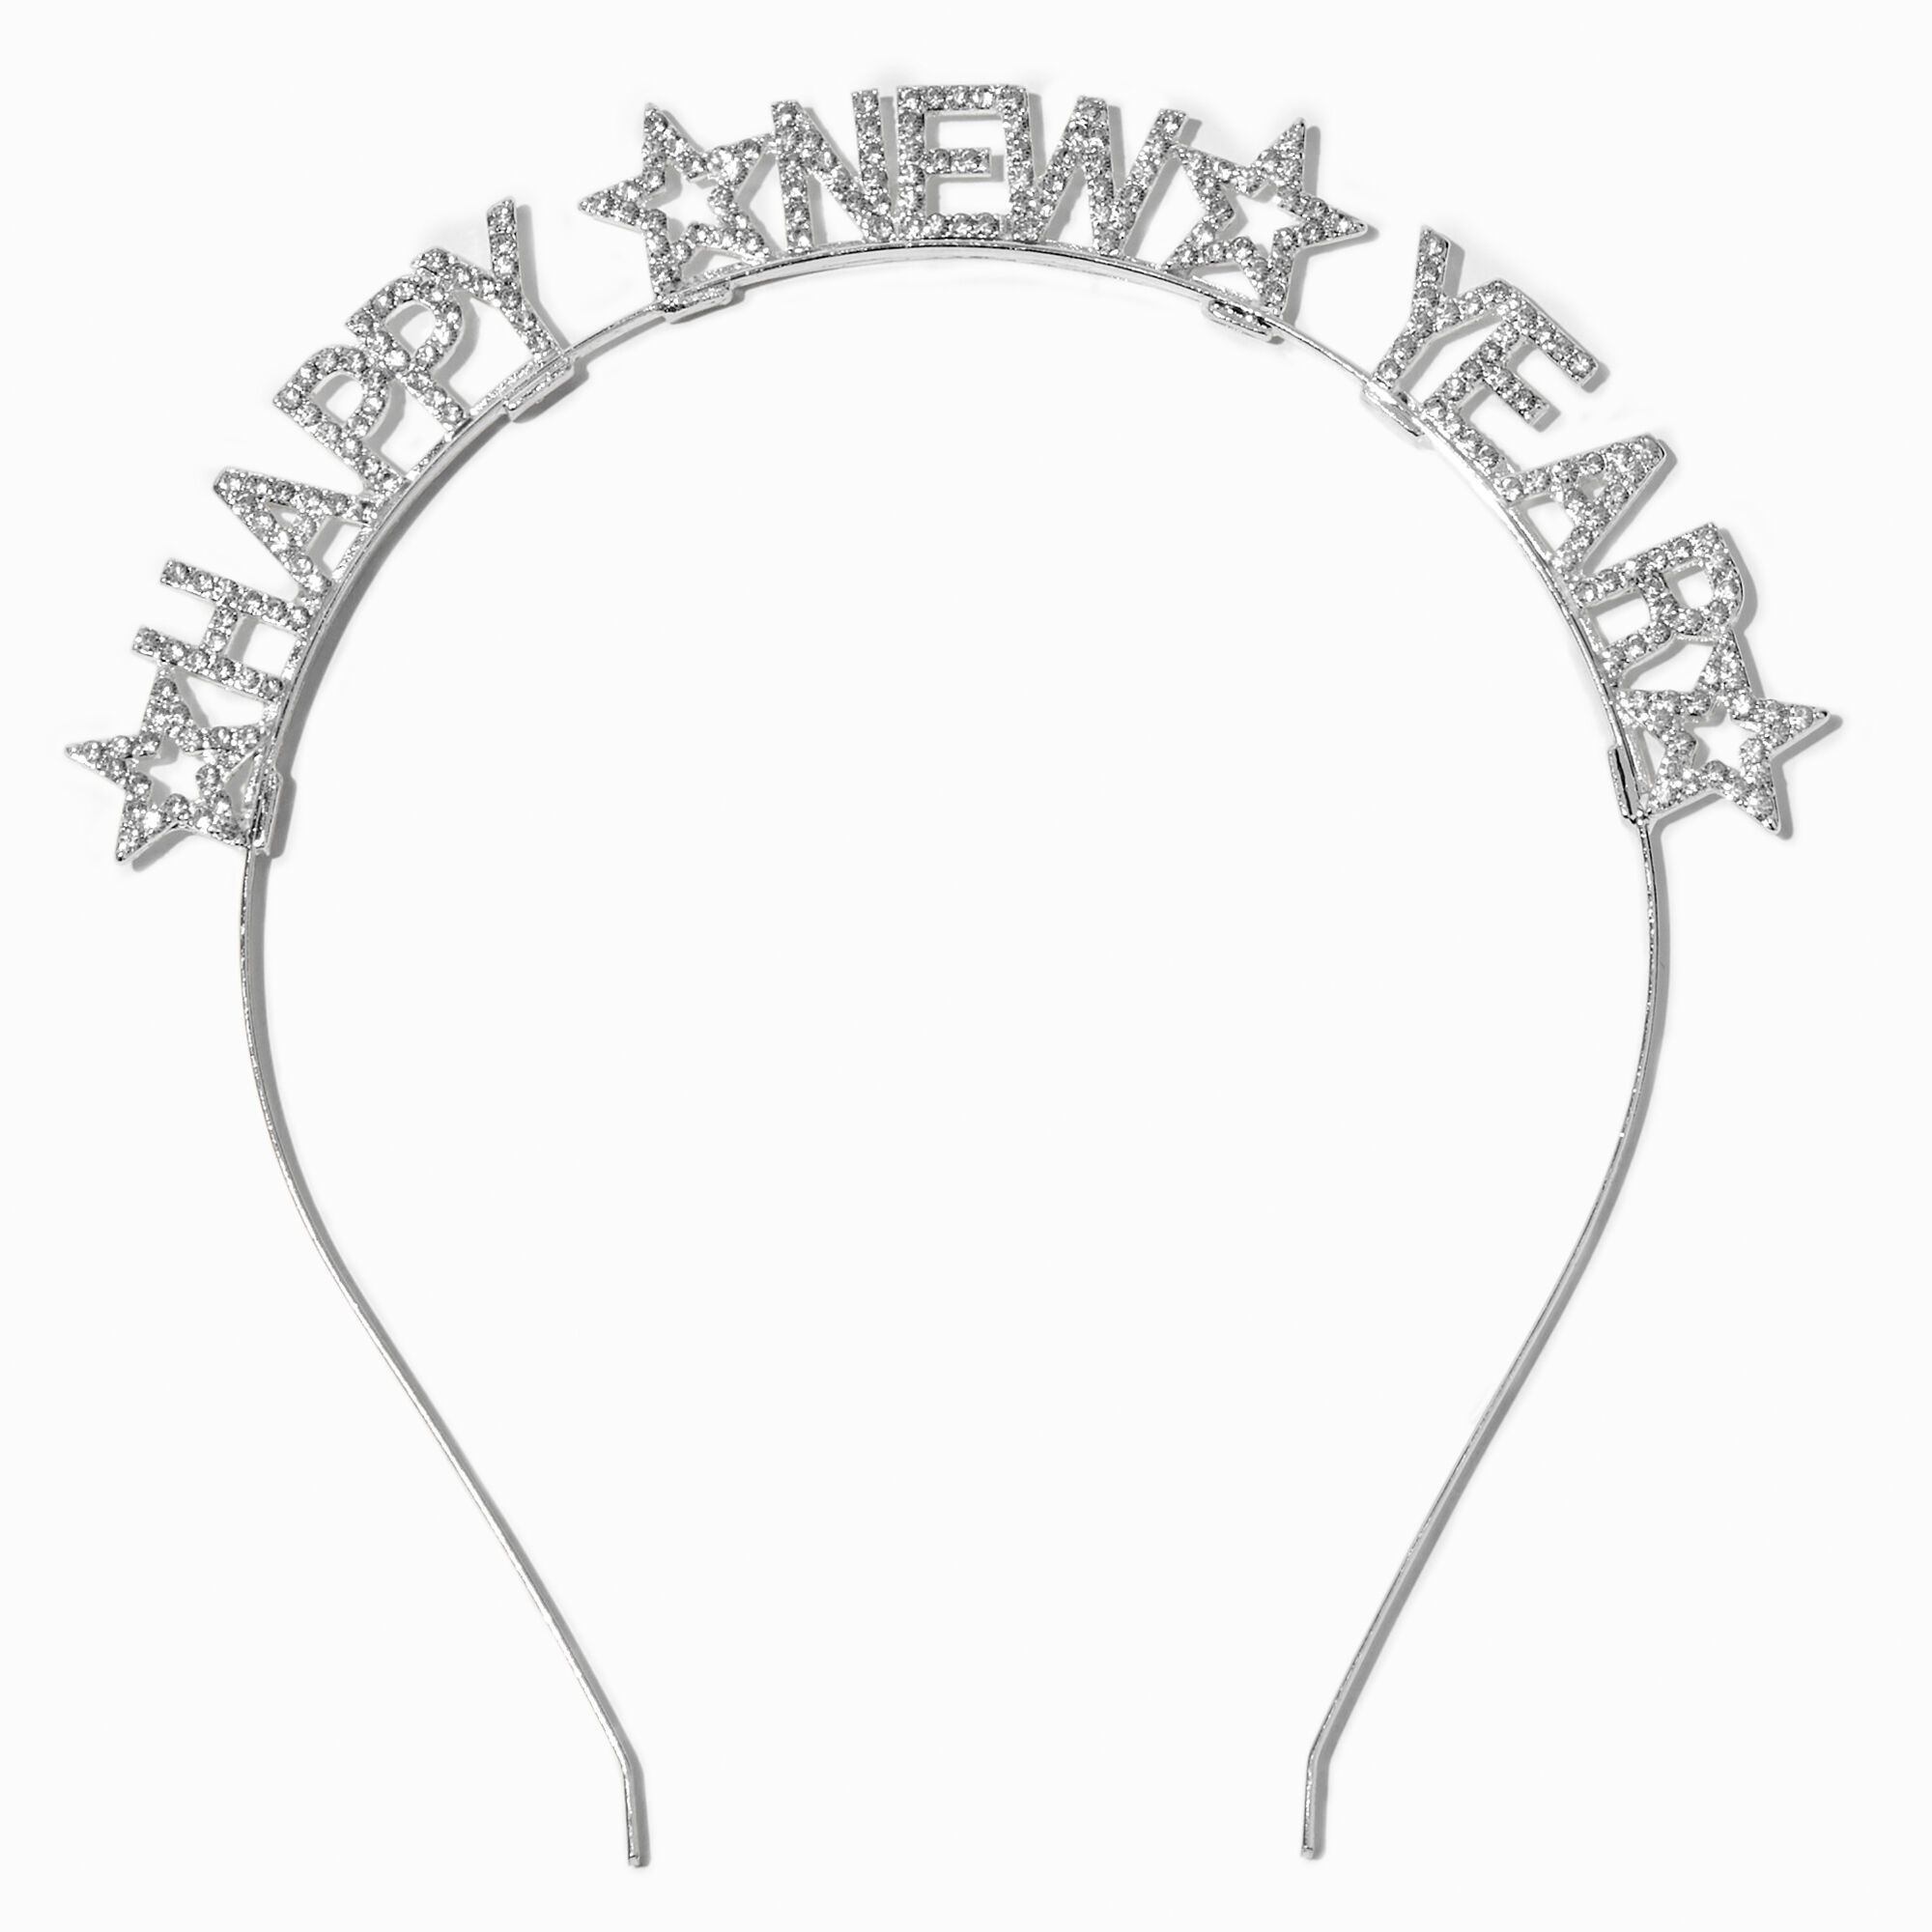 Bling "Happy New Year" Metal Headband | Claire's (US)